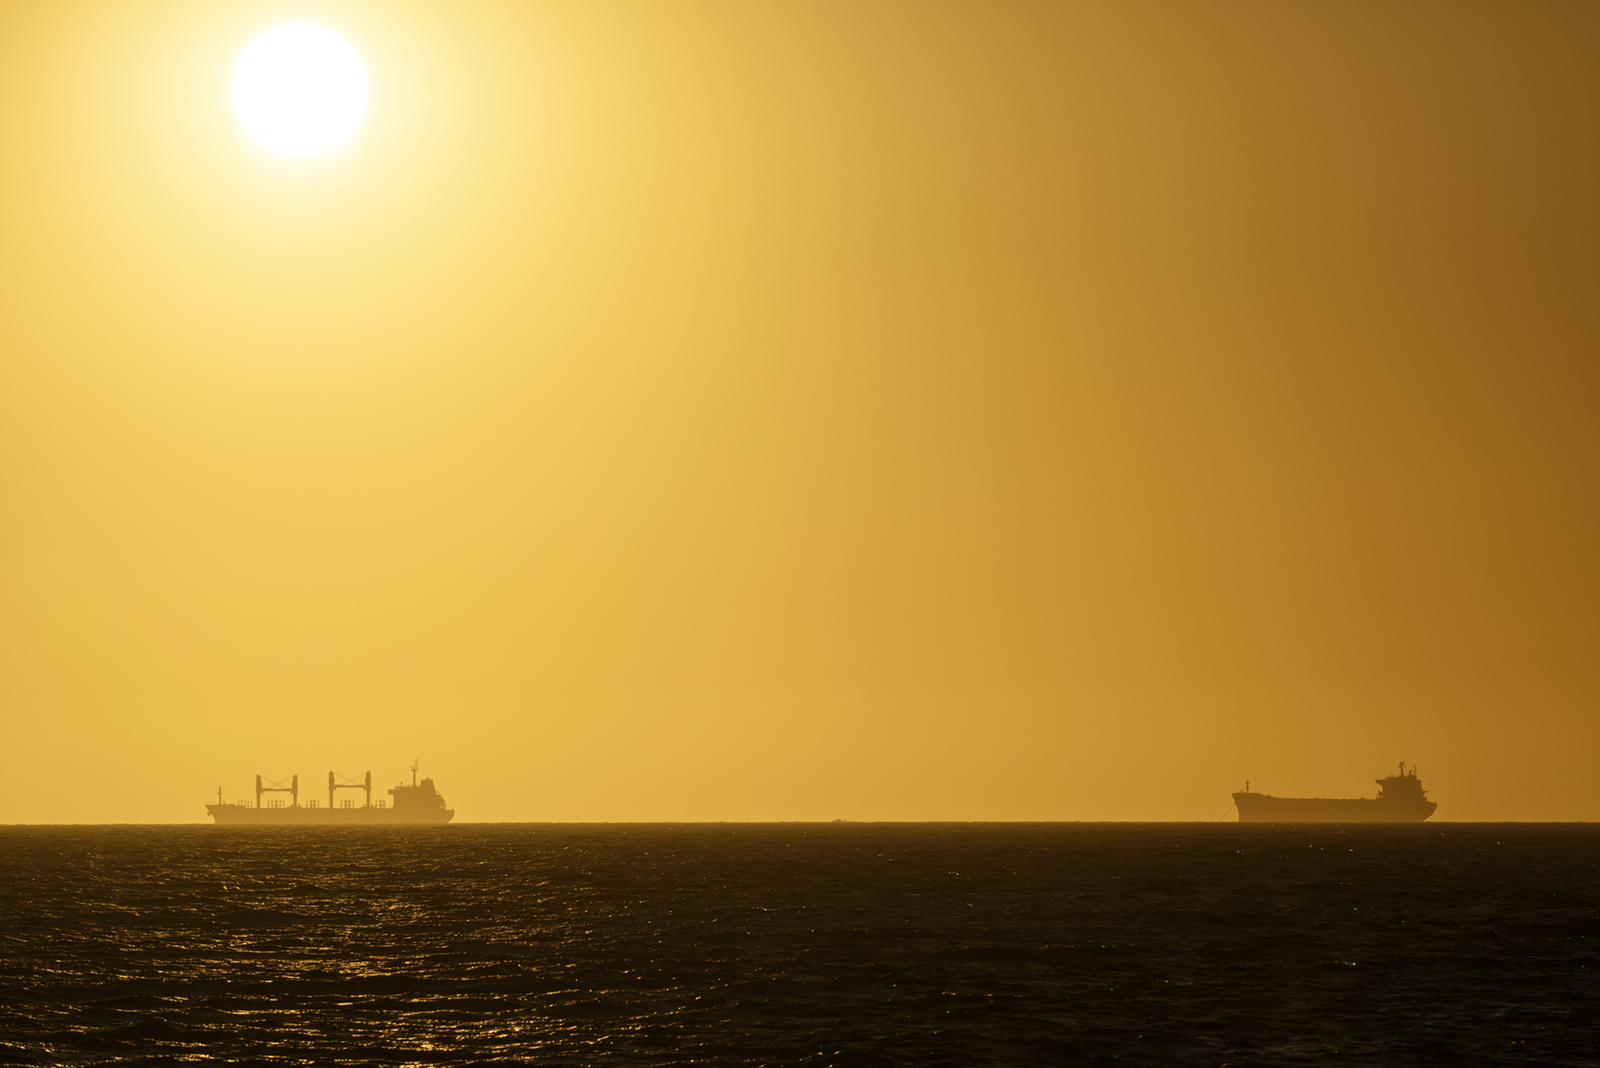 Ships on a sunny horizon in Perth